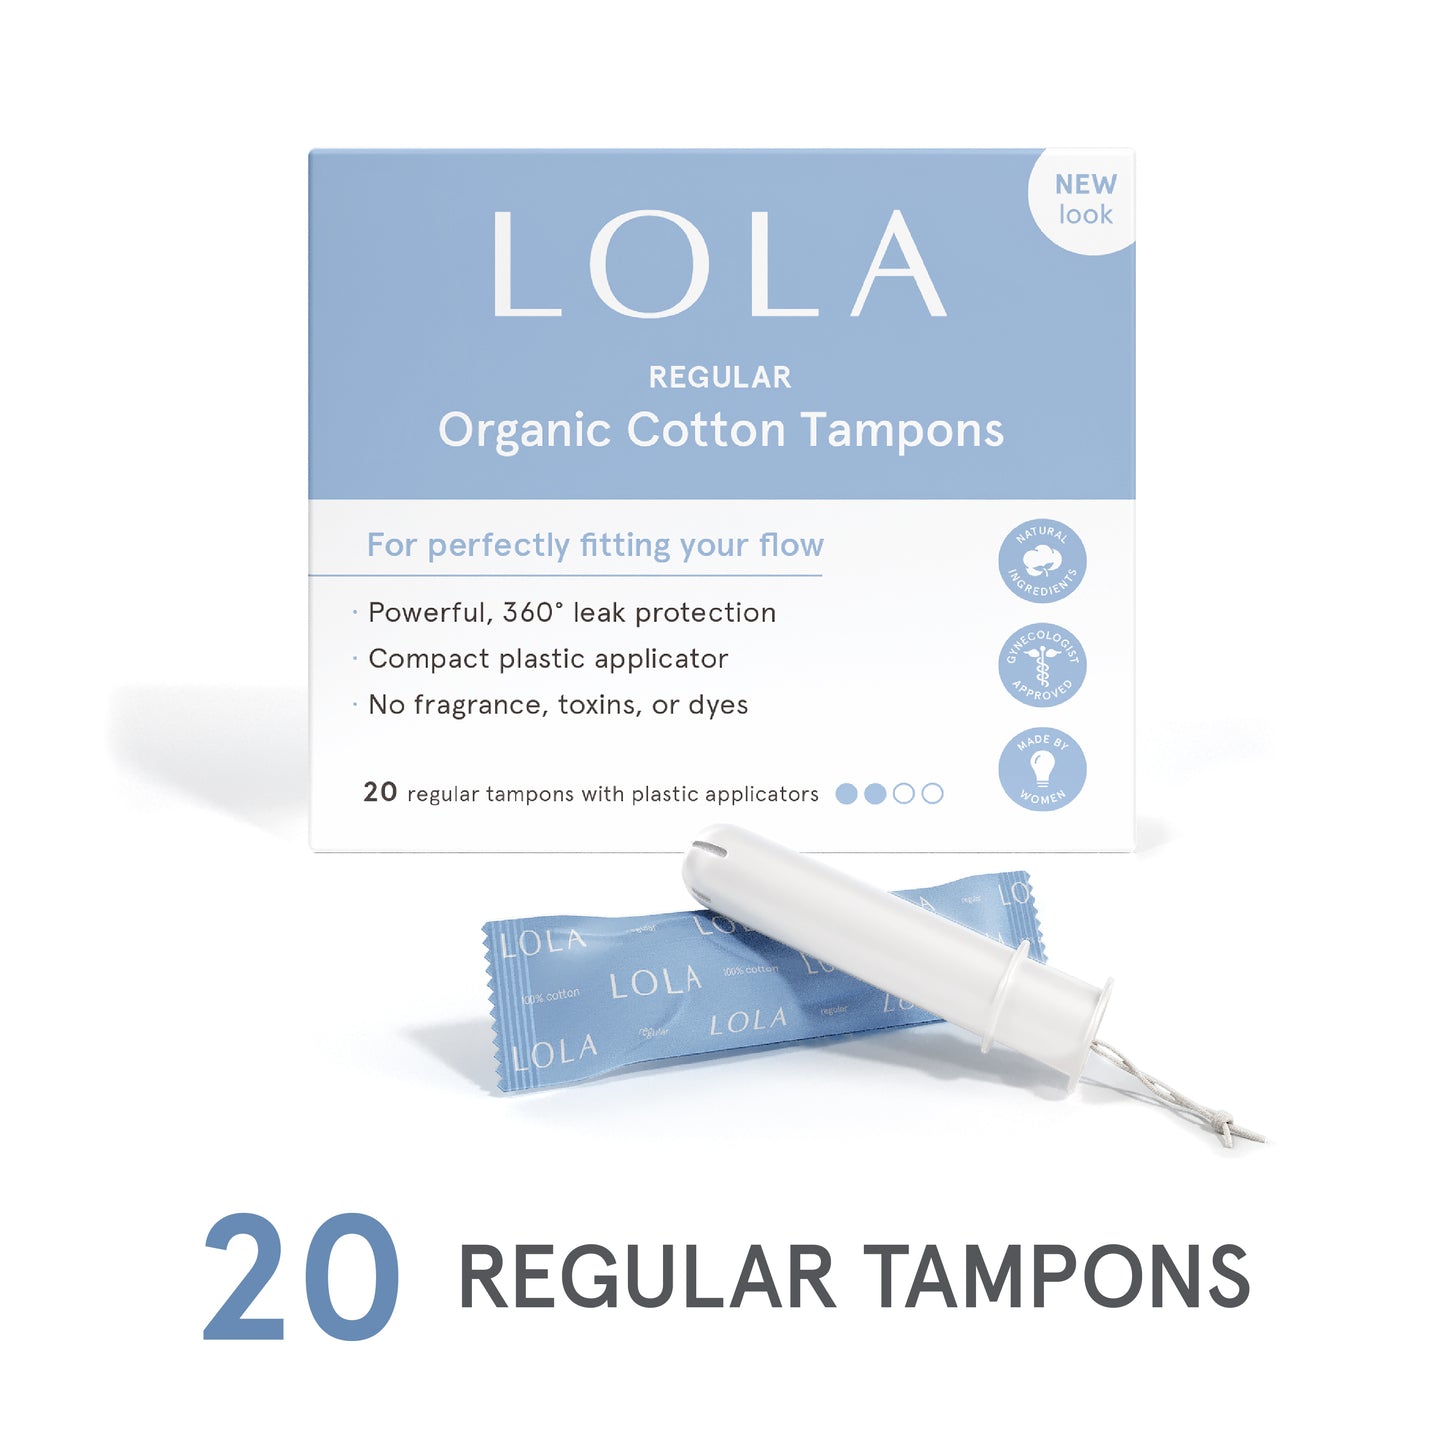 Grab & Go Compact Plastic Applicator Tampons: Every 6 months